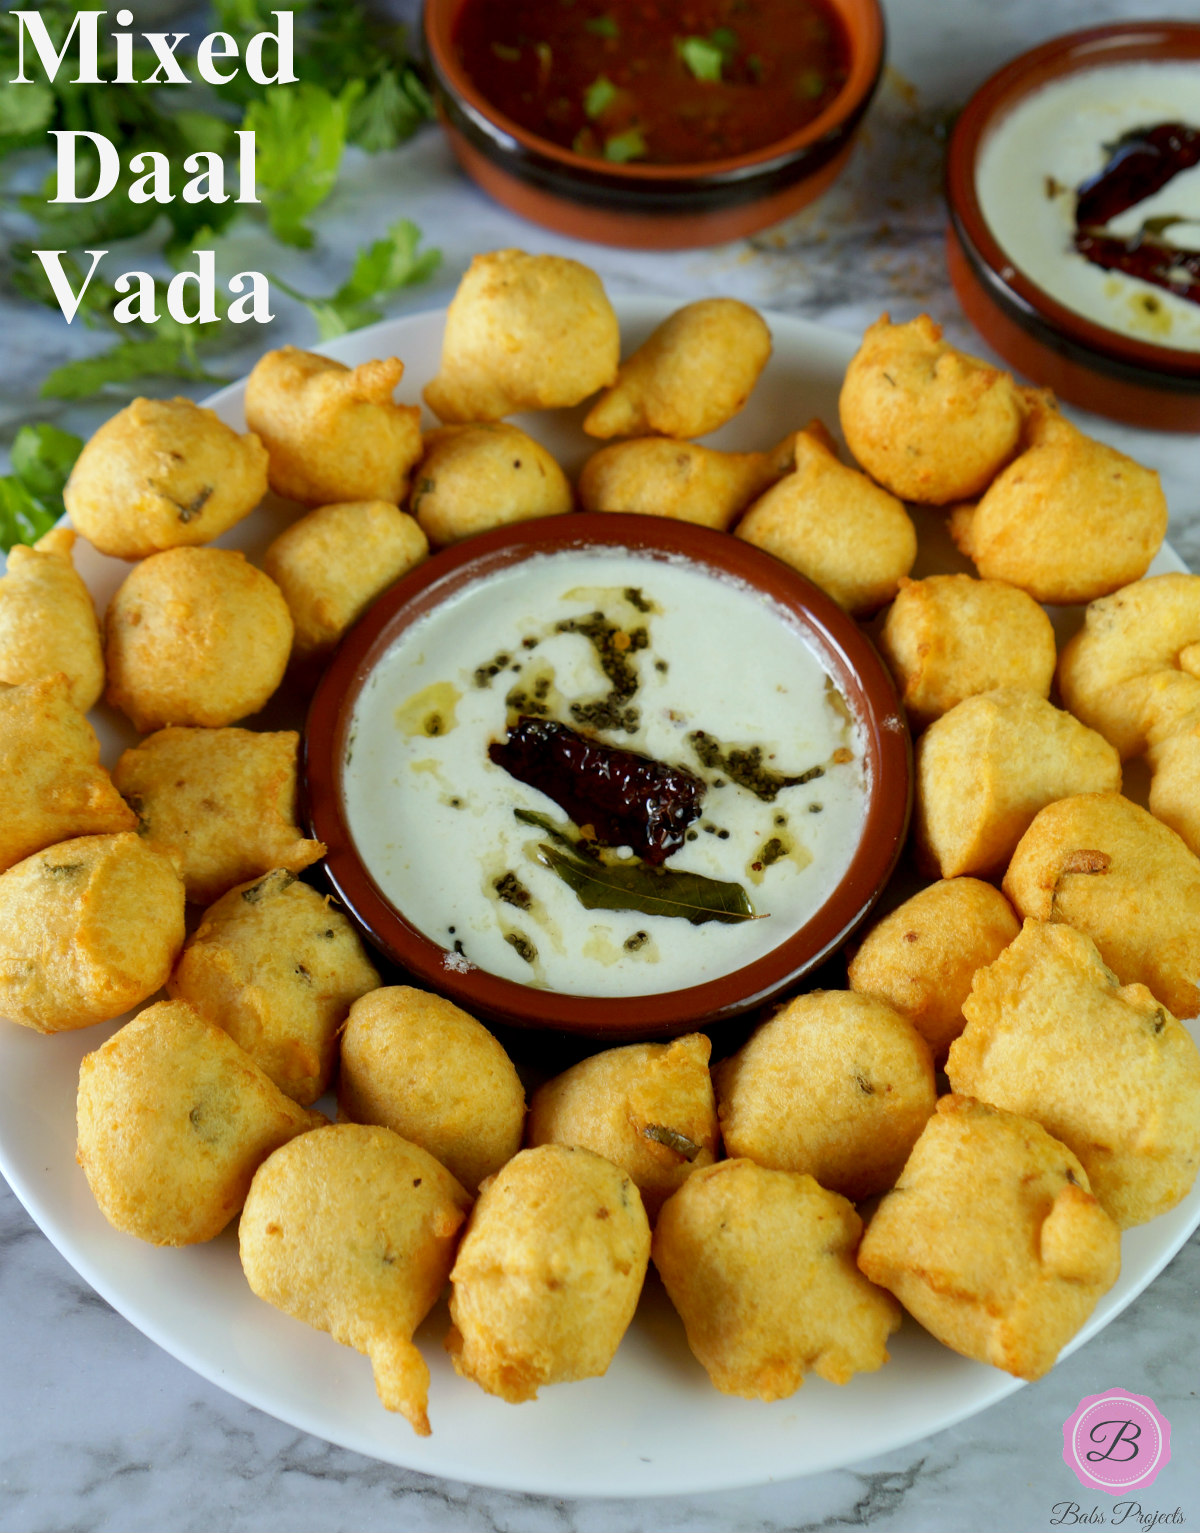 Mix Daal Vada Served in a White Plate with Coconut Chutney in the Center